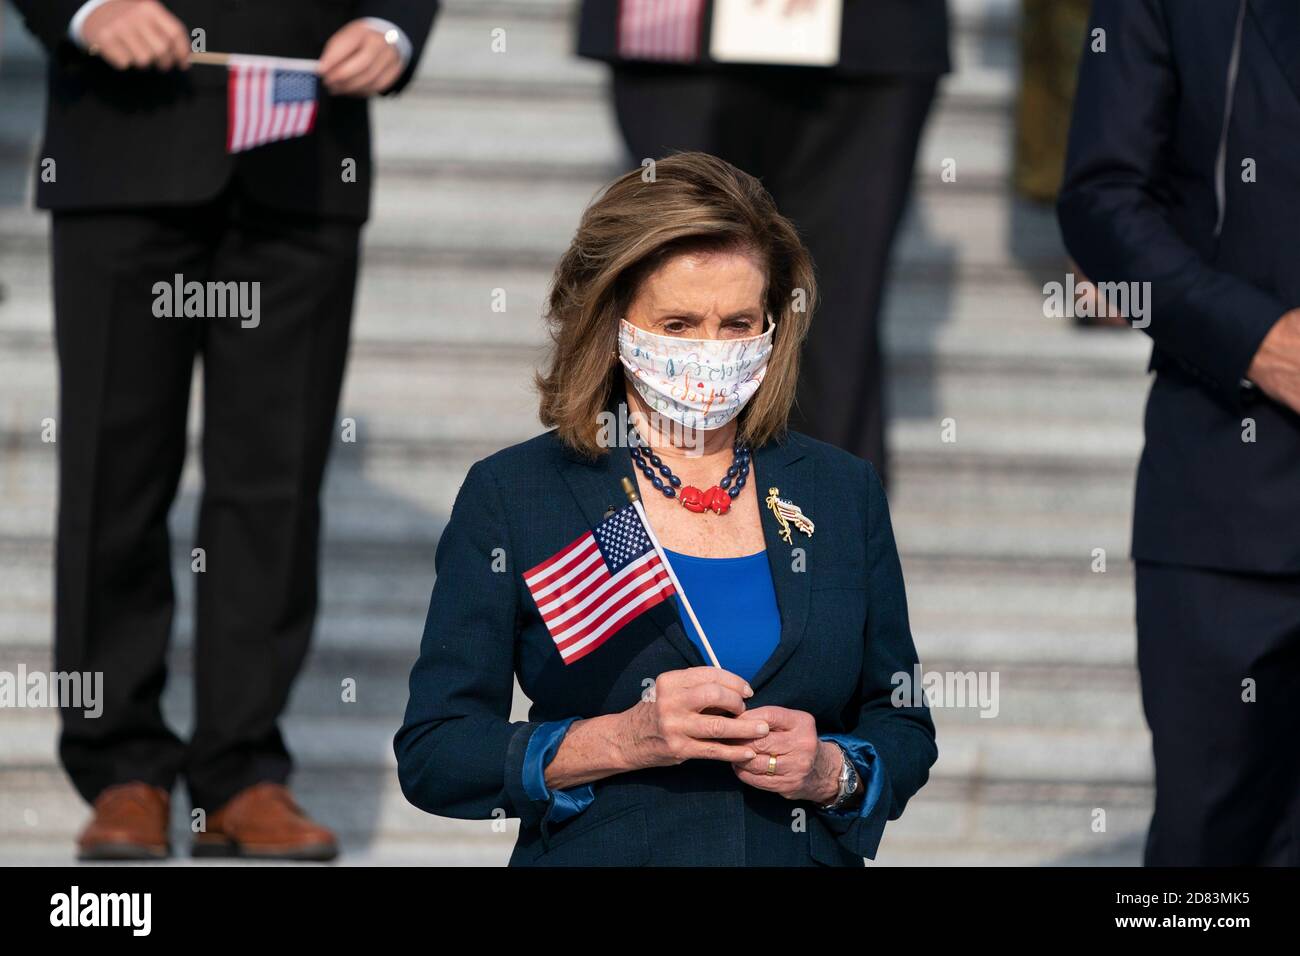 US House Speaker Nancy Pelosi, D-CA, participates in a moment of silence honoring the victims of the 9/11 terrorist attack outside the US Capitol Building on September 11, 2020 in Washington, D.C. Credit: Alex Edelman/The Photo Access Stock Photo